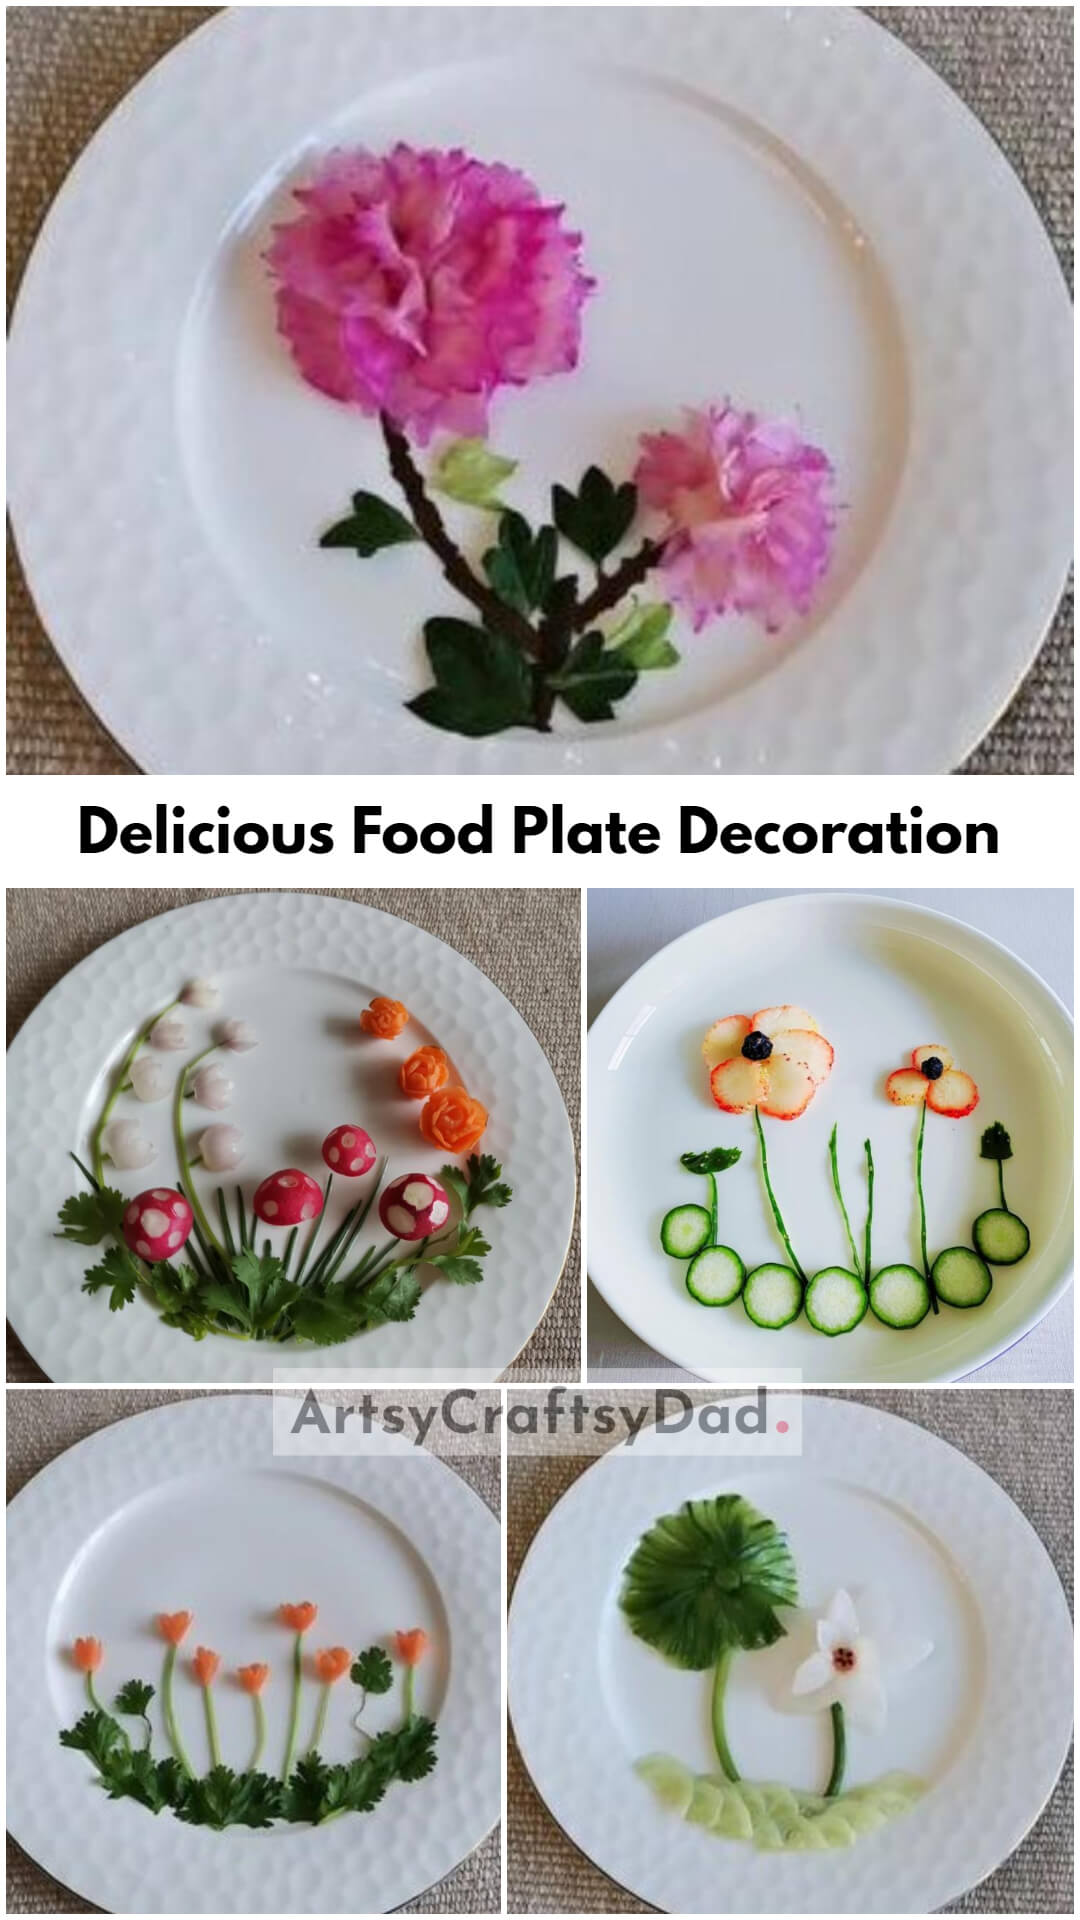 Delicious Food Plate Decoration on White Plate